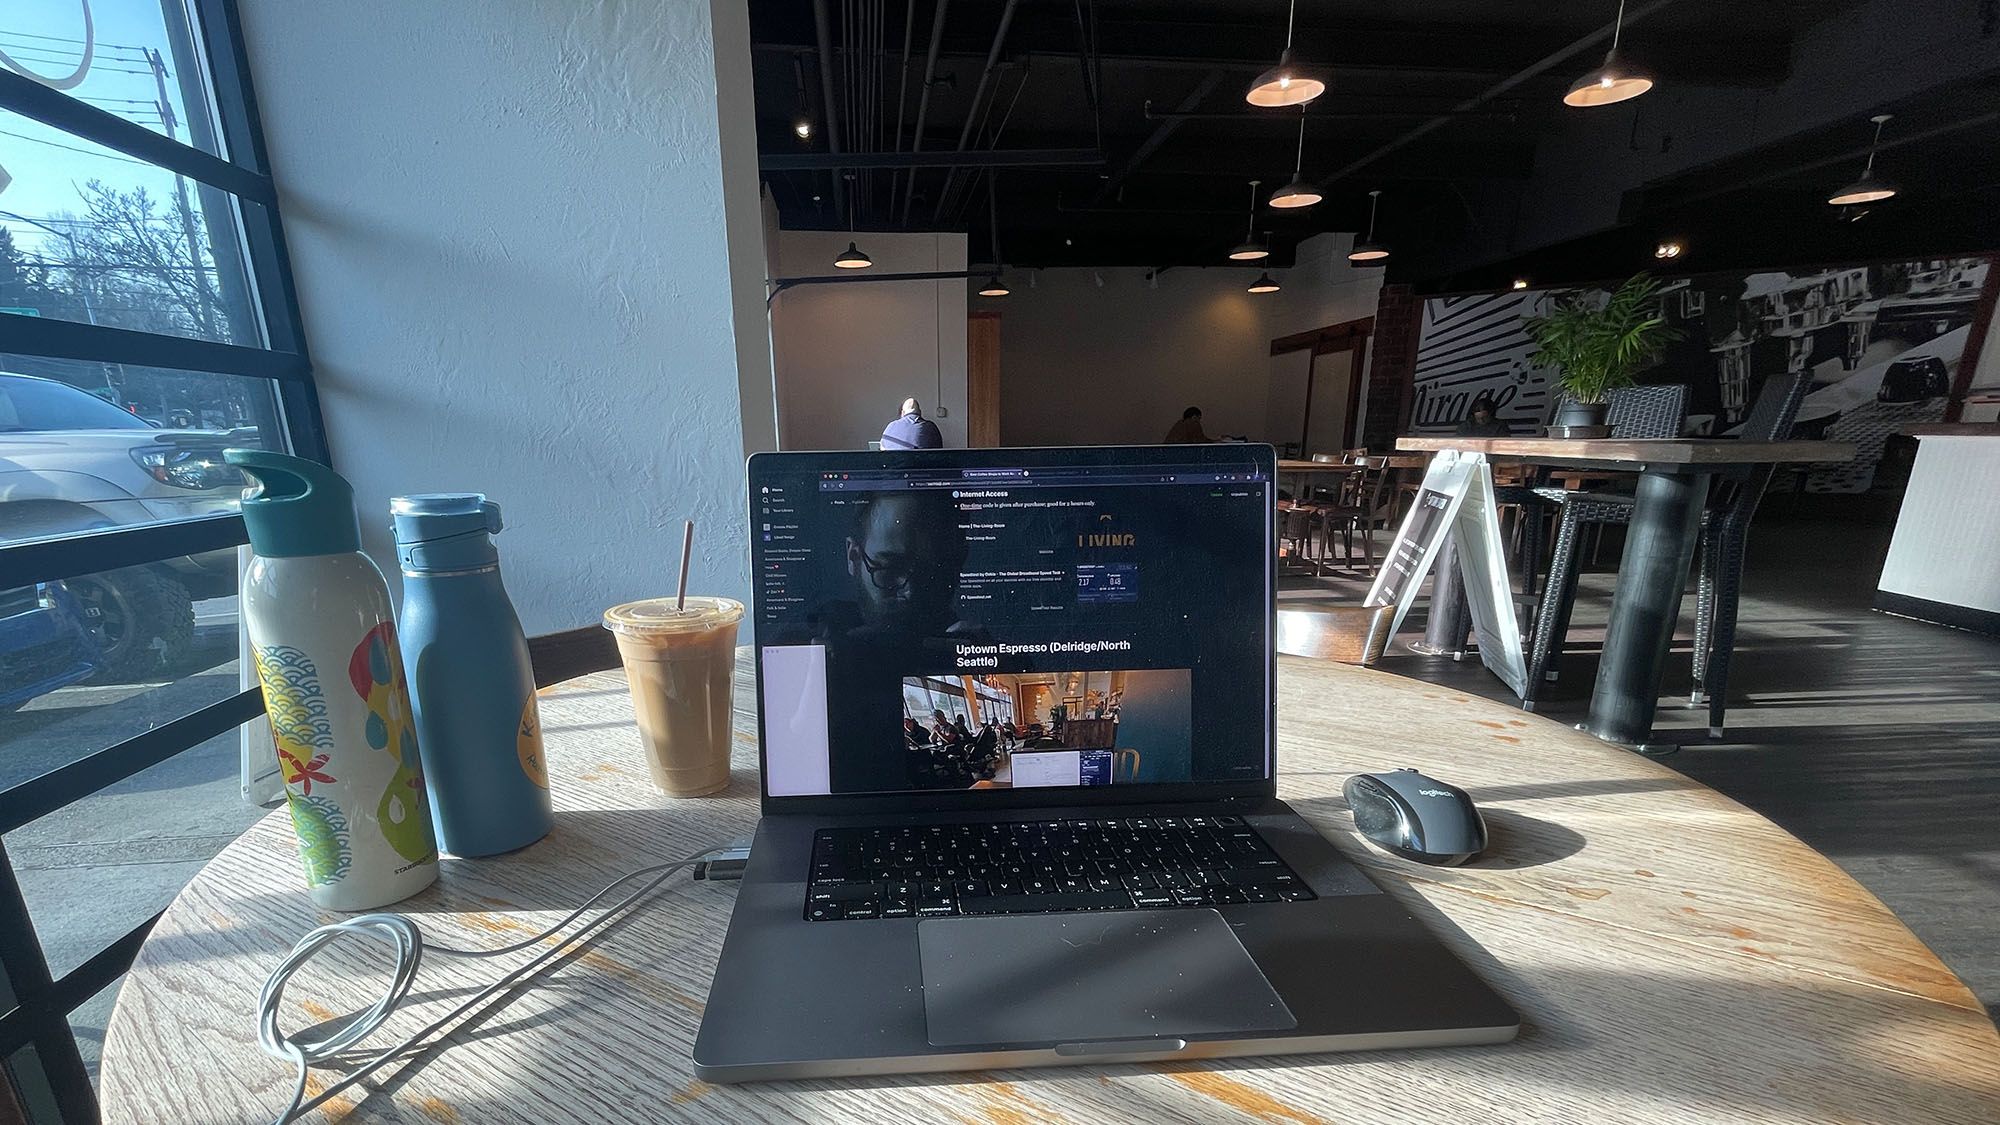 Seattle Cafes That Are Perfect for Remote Work